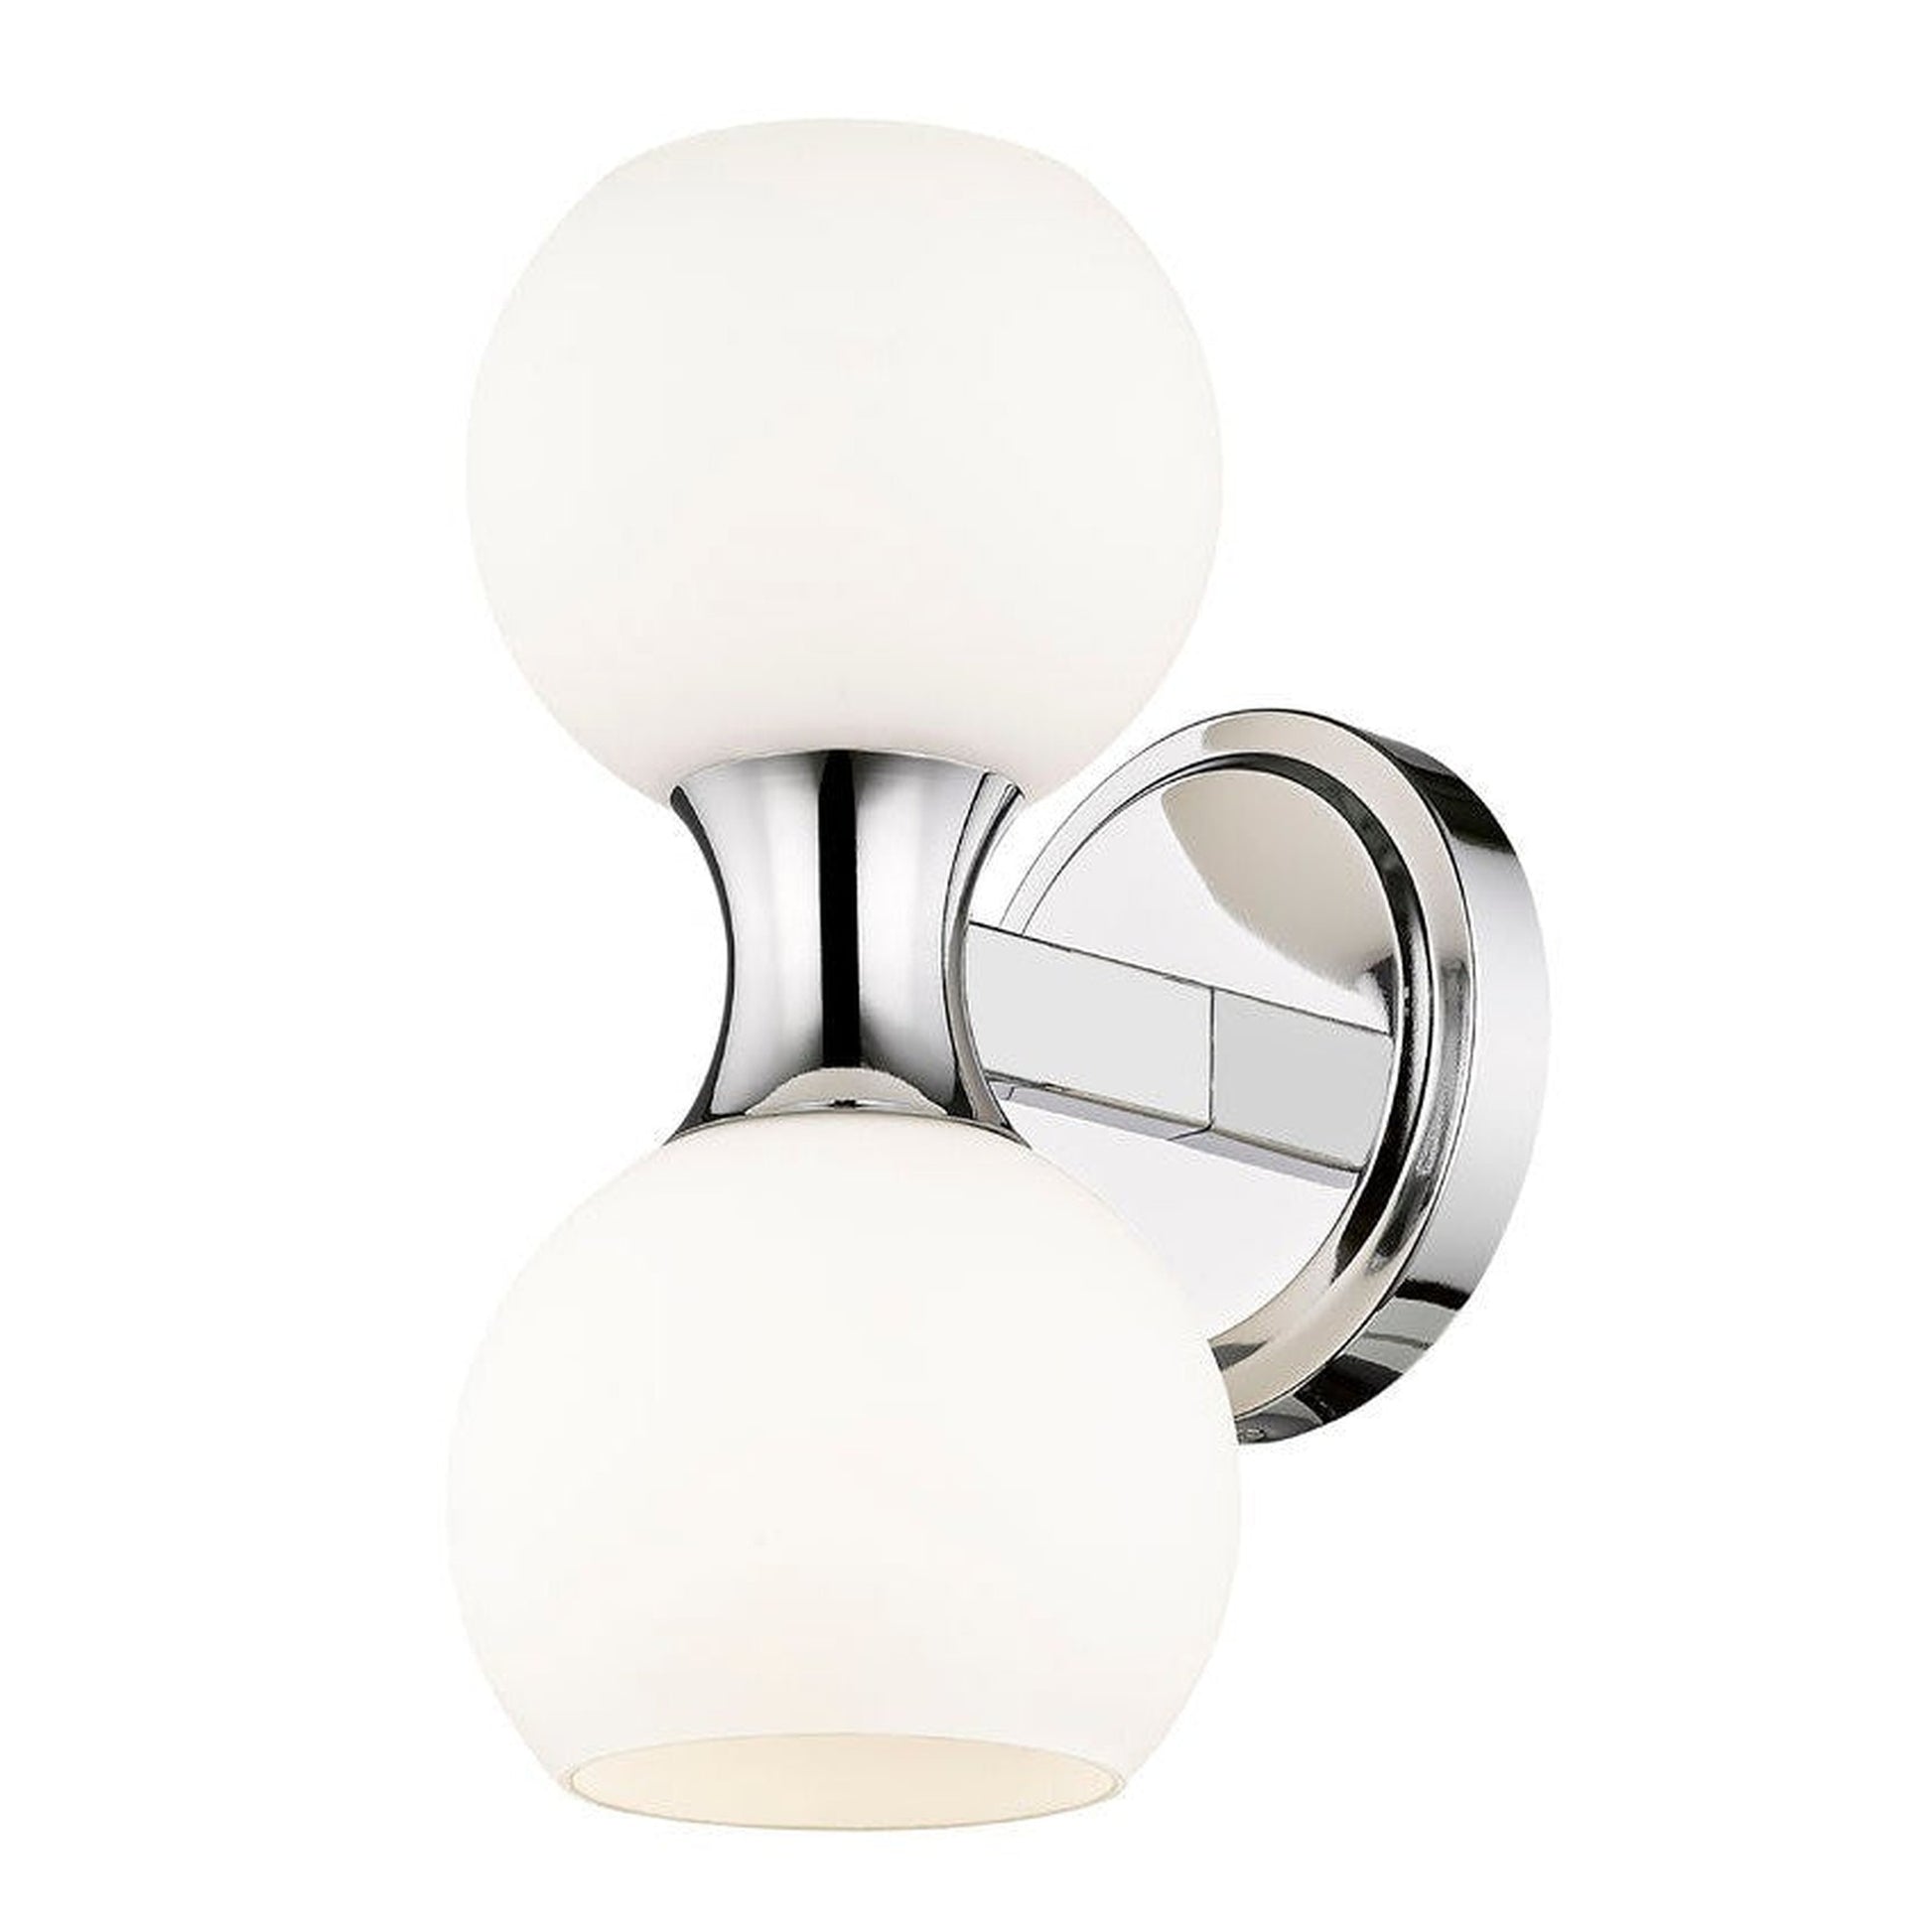 Z-Lite Artemis 5" 2-Light Chrome and Matte Opal Glass Shade Wall Sconce